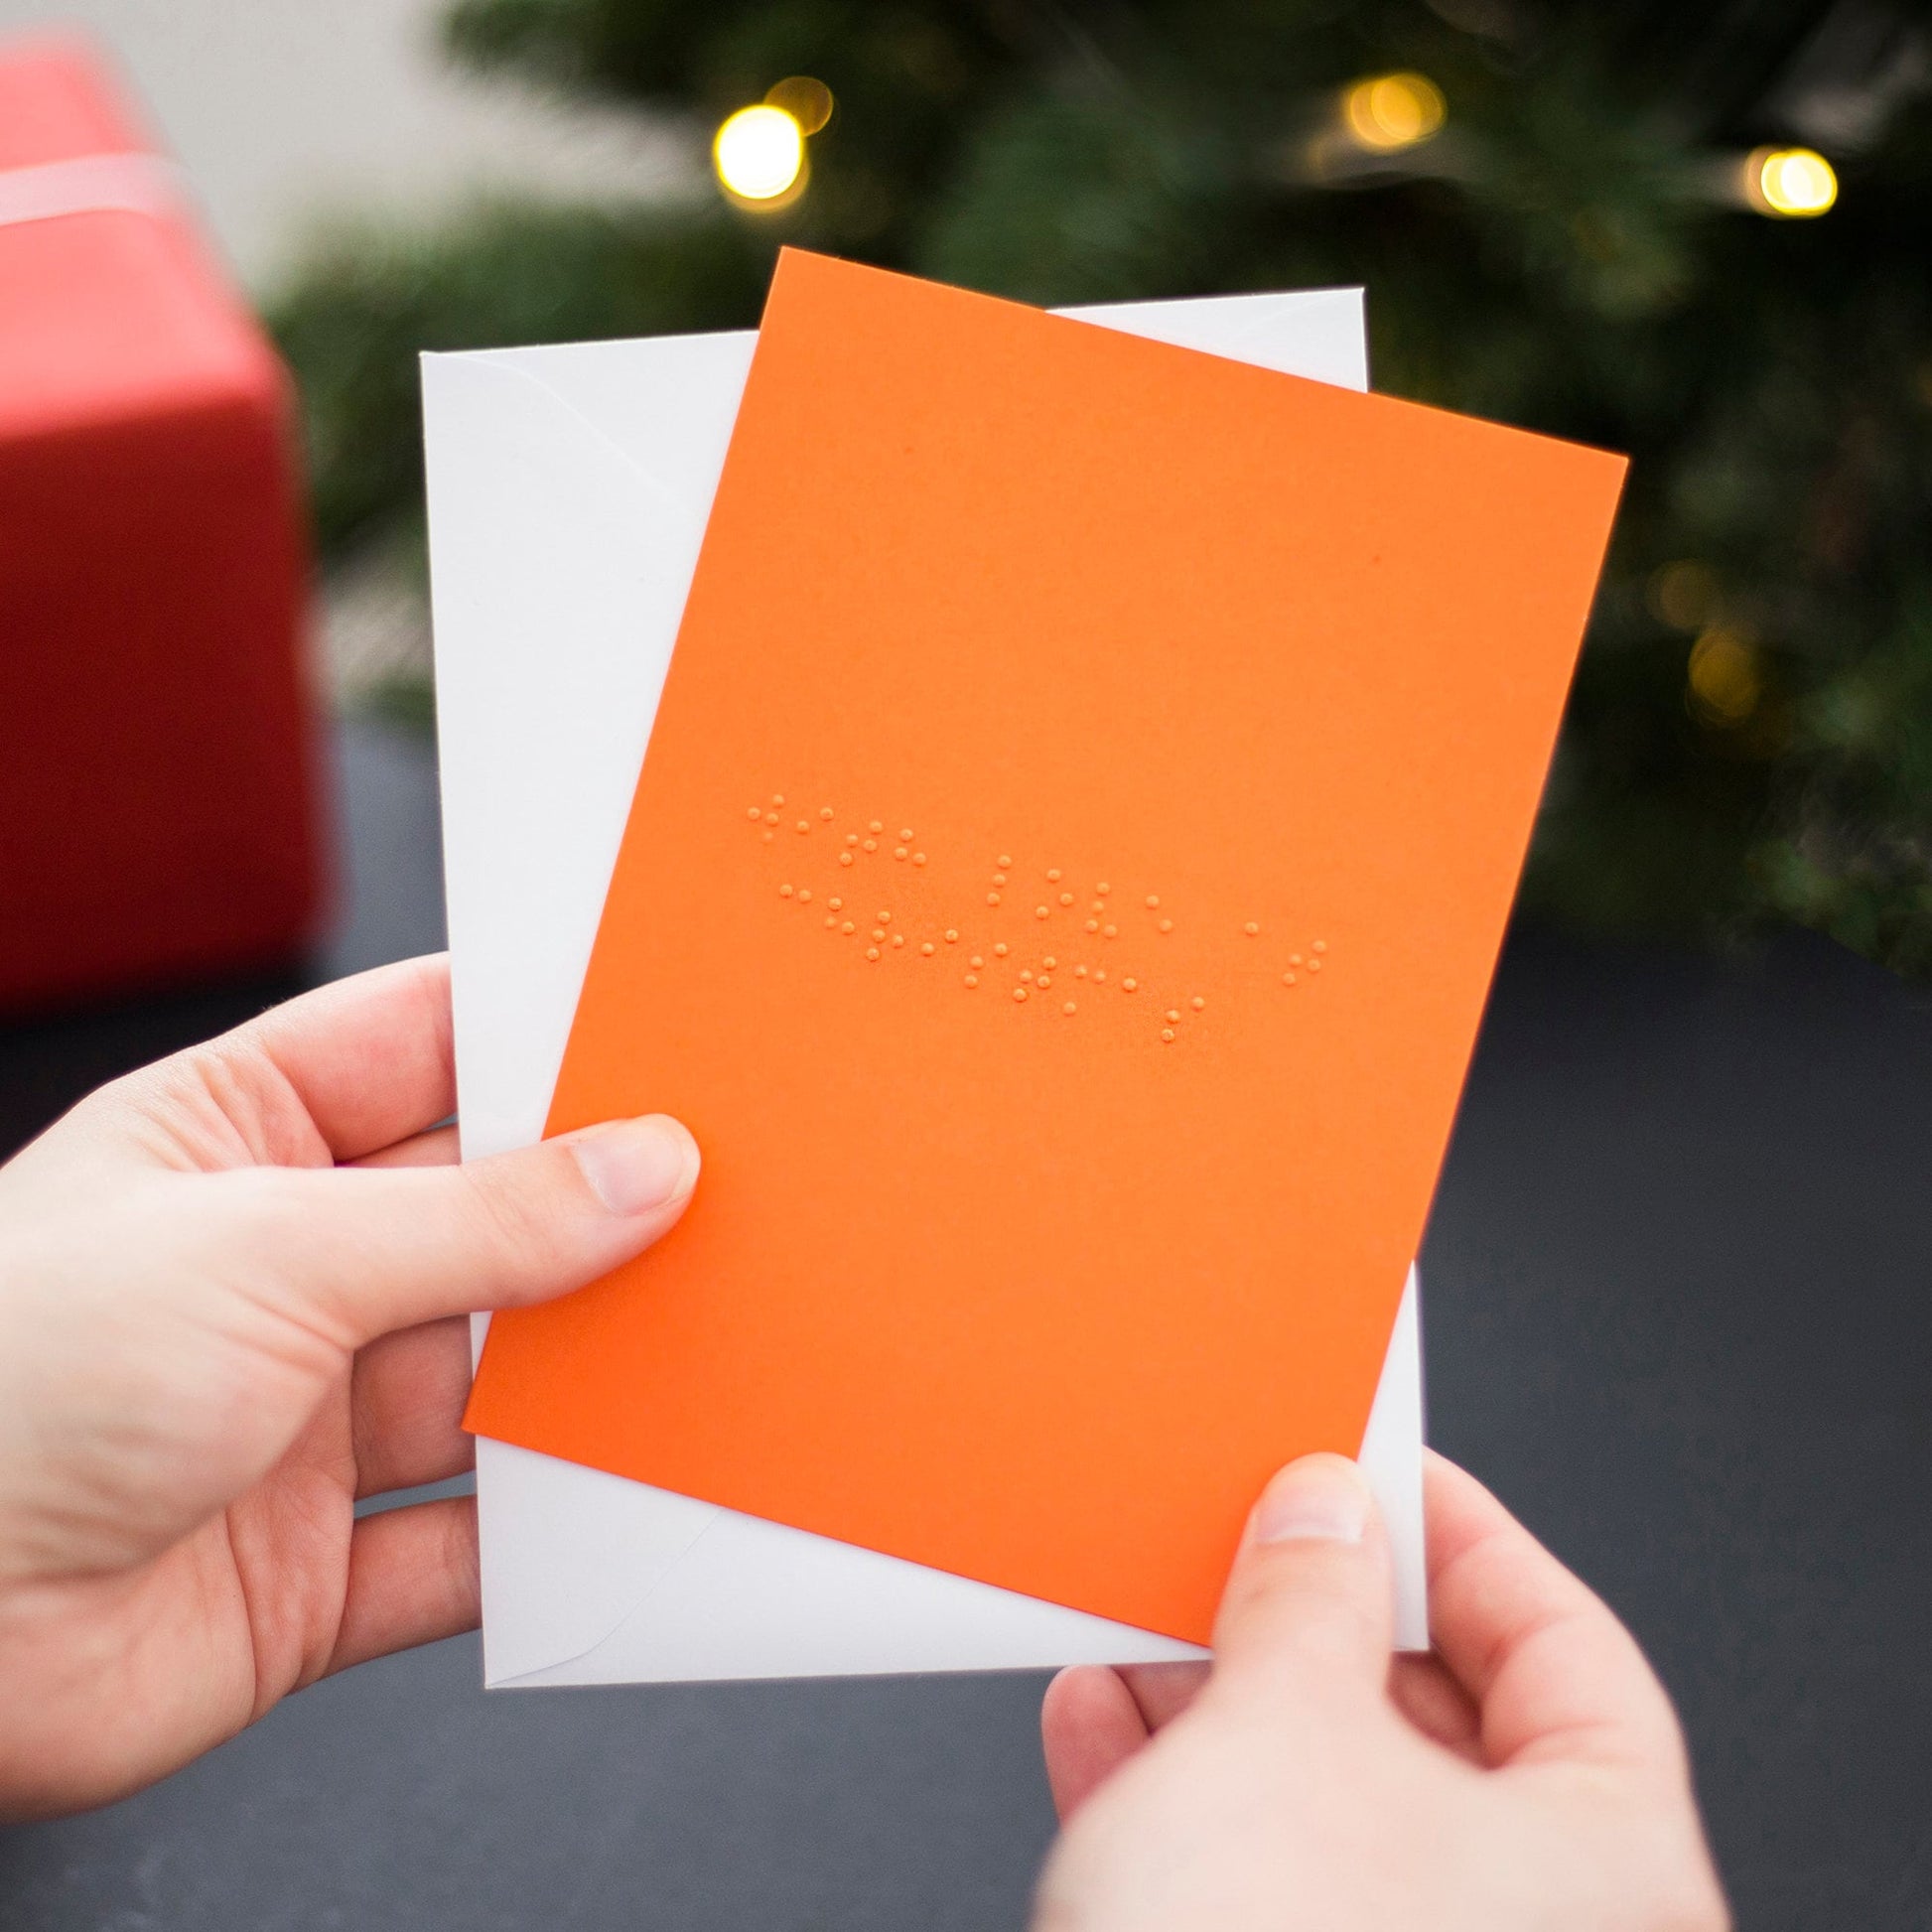 Hands holding an orange braille Christmas card saying With Love at Christmas written in lower case UEB.